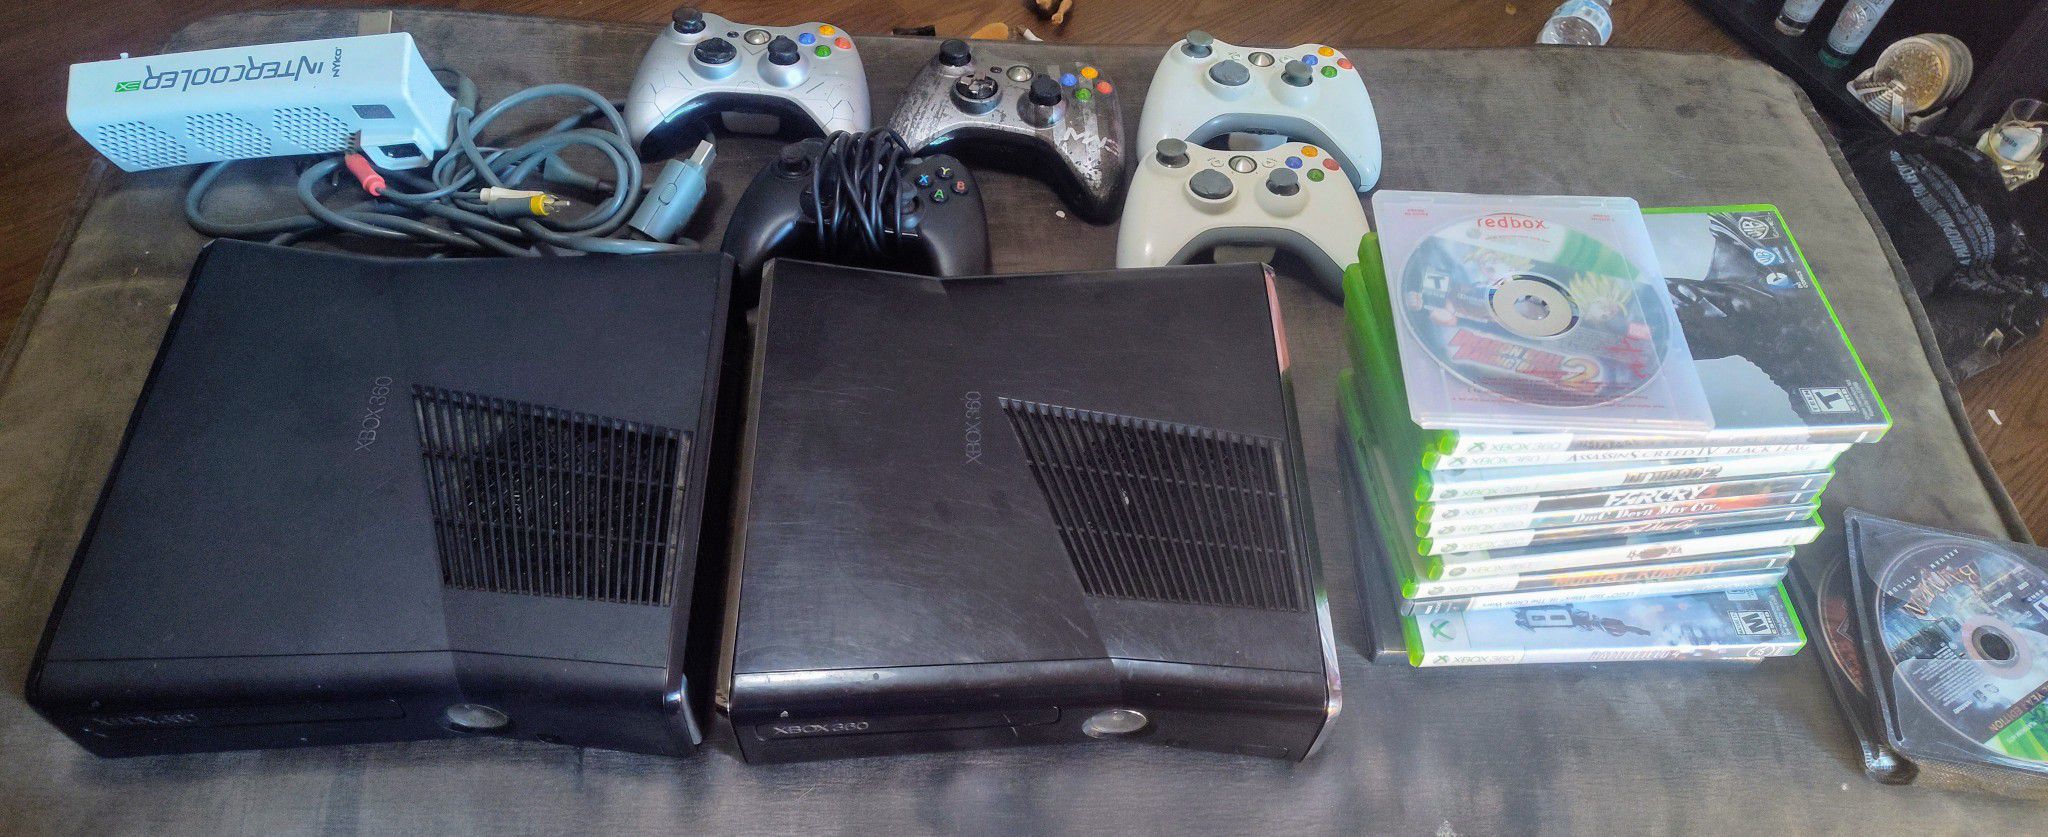 Xbox 360 With 28 Games